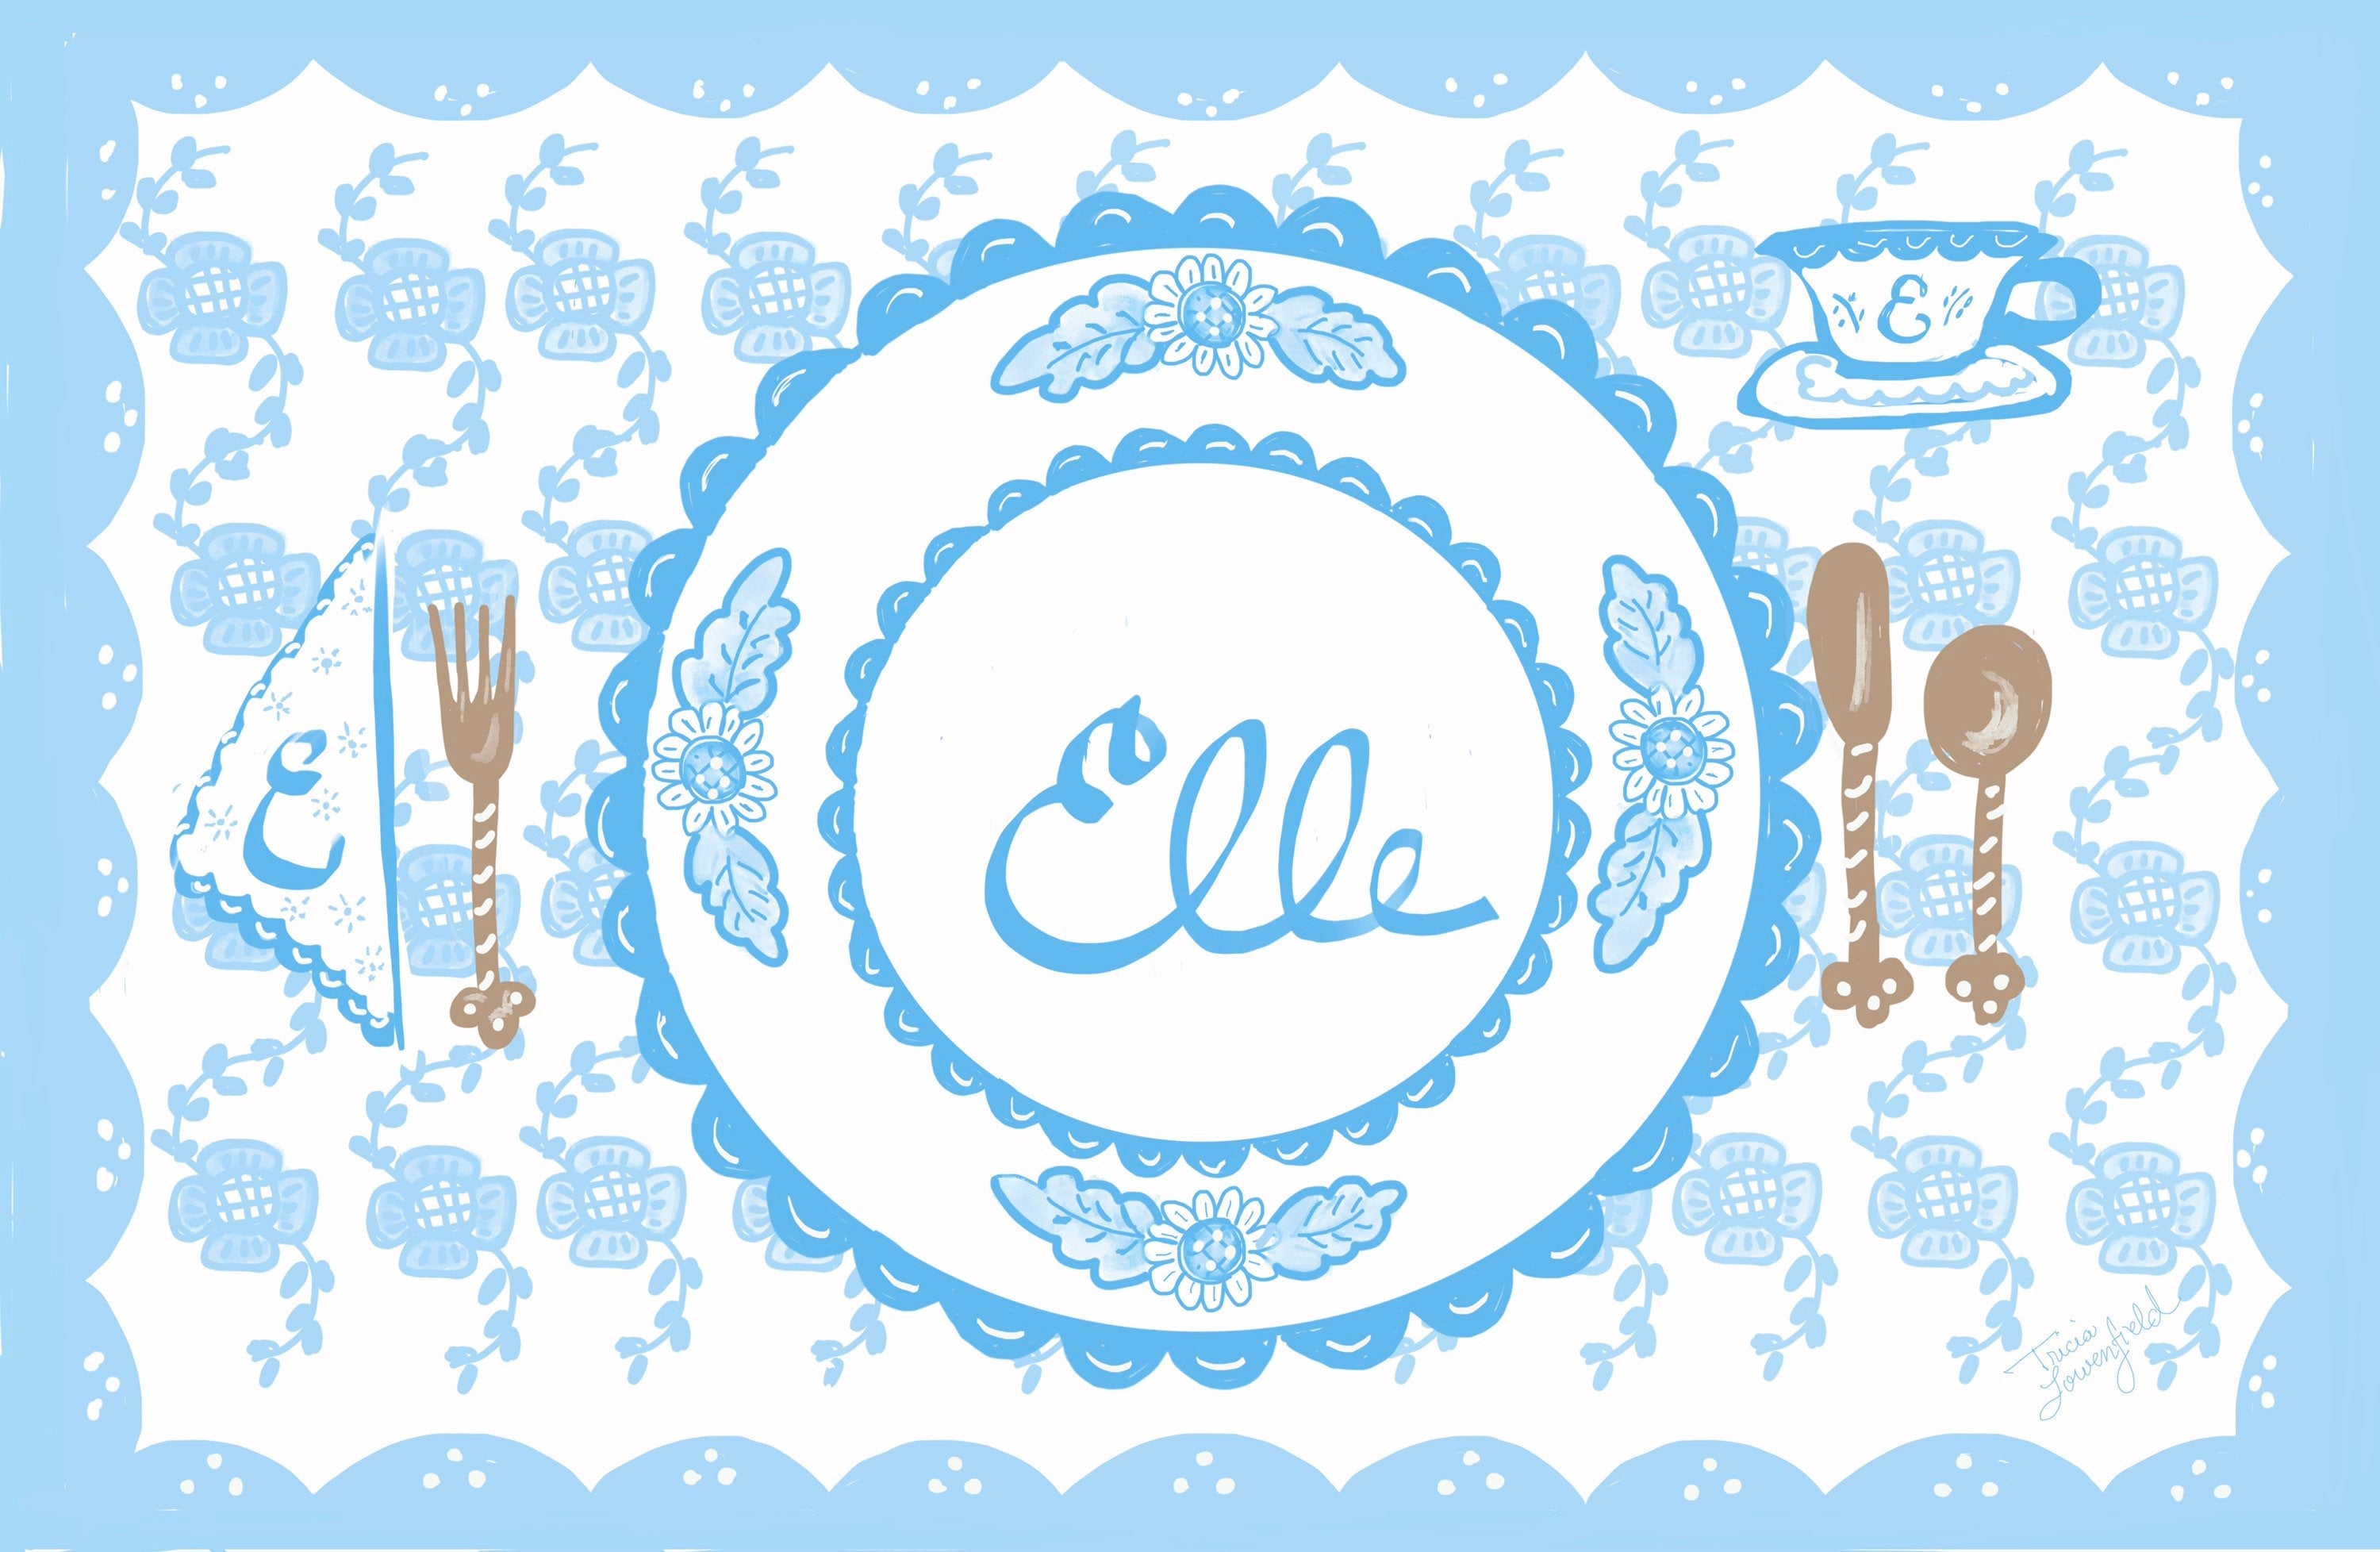 Laminated Placemat - Pastel Blue/White (Collaboration with Born on Fifth) - Premium  from Tricia Lowenfield Shop 